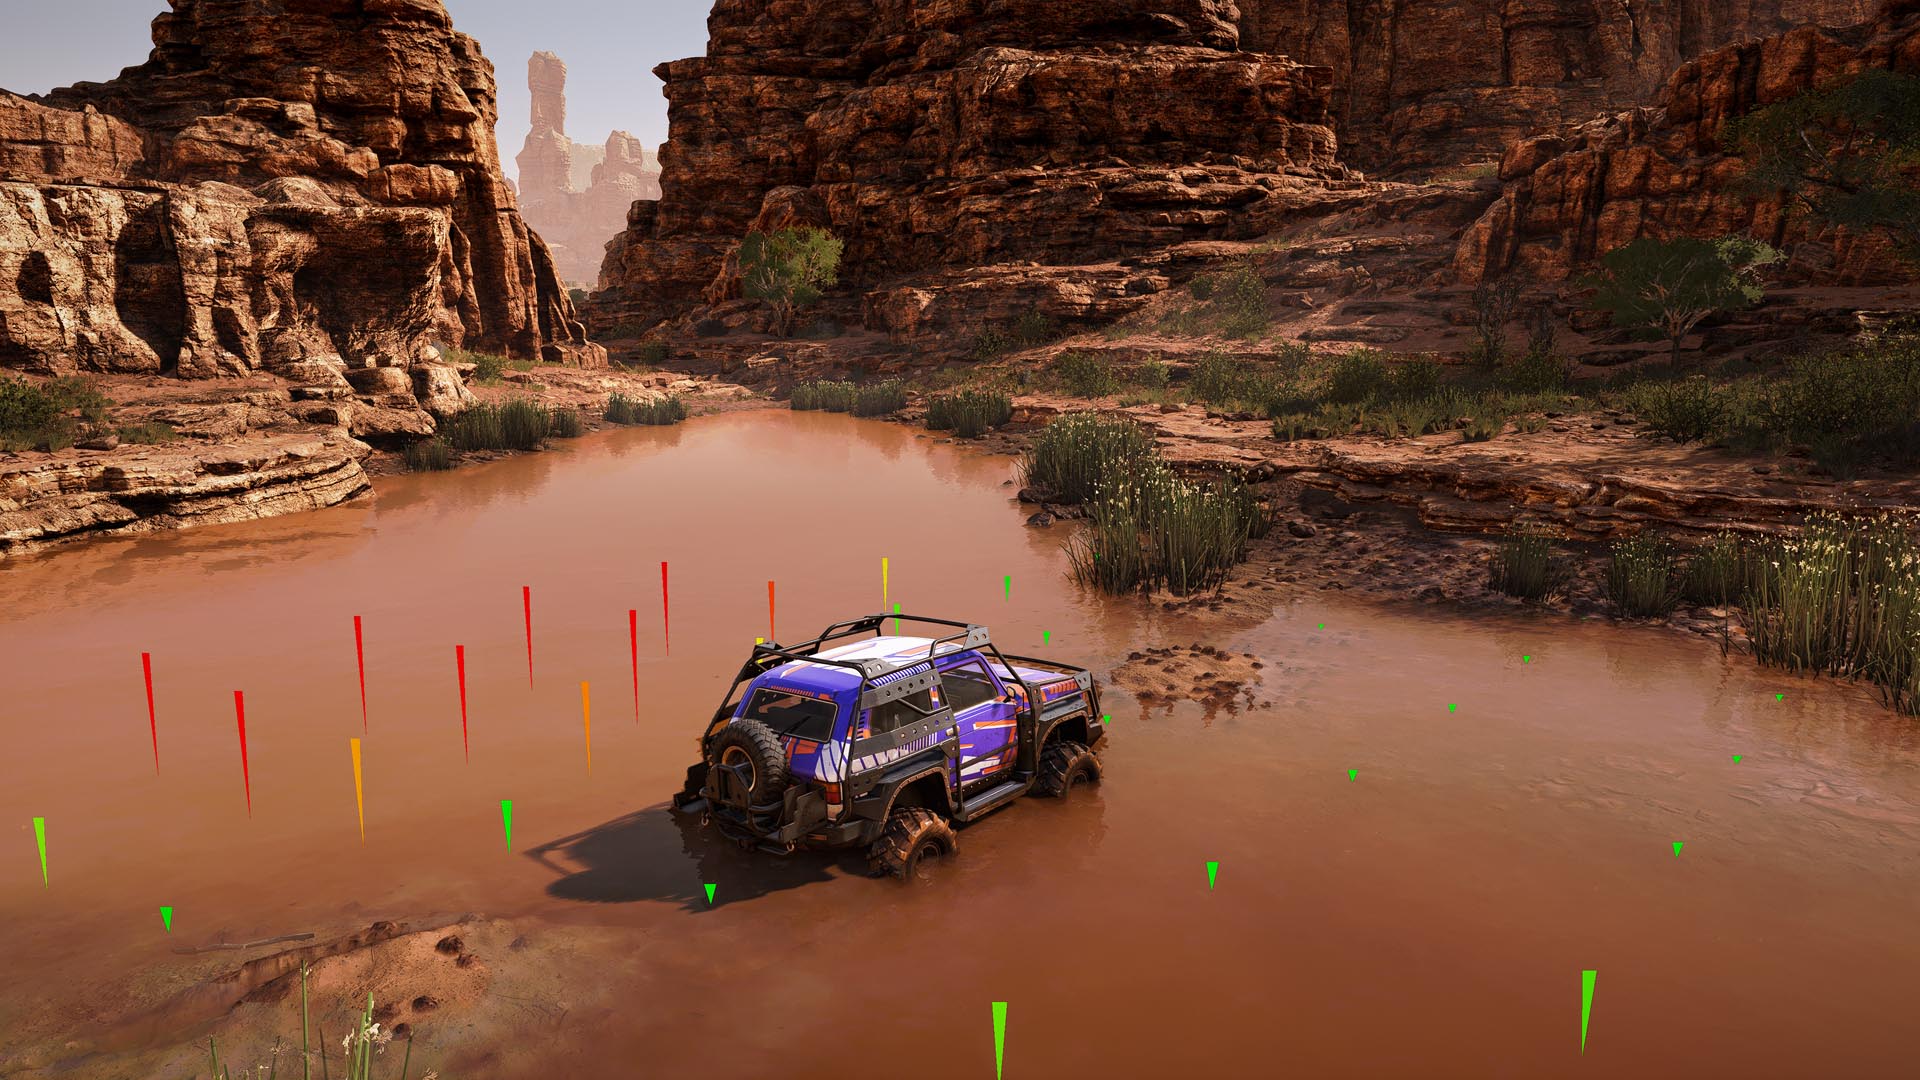 Expeditions: A screenshot of the Mudrunner game